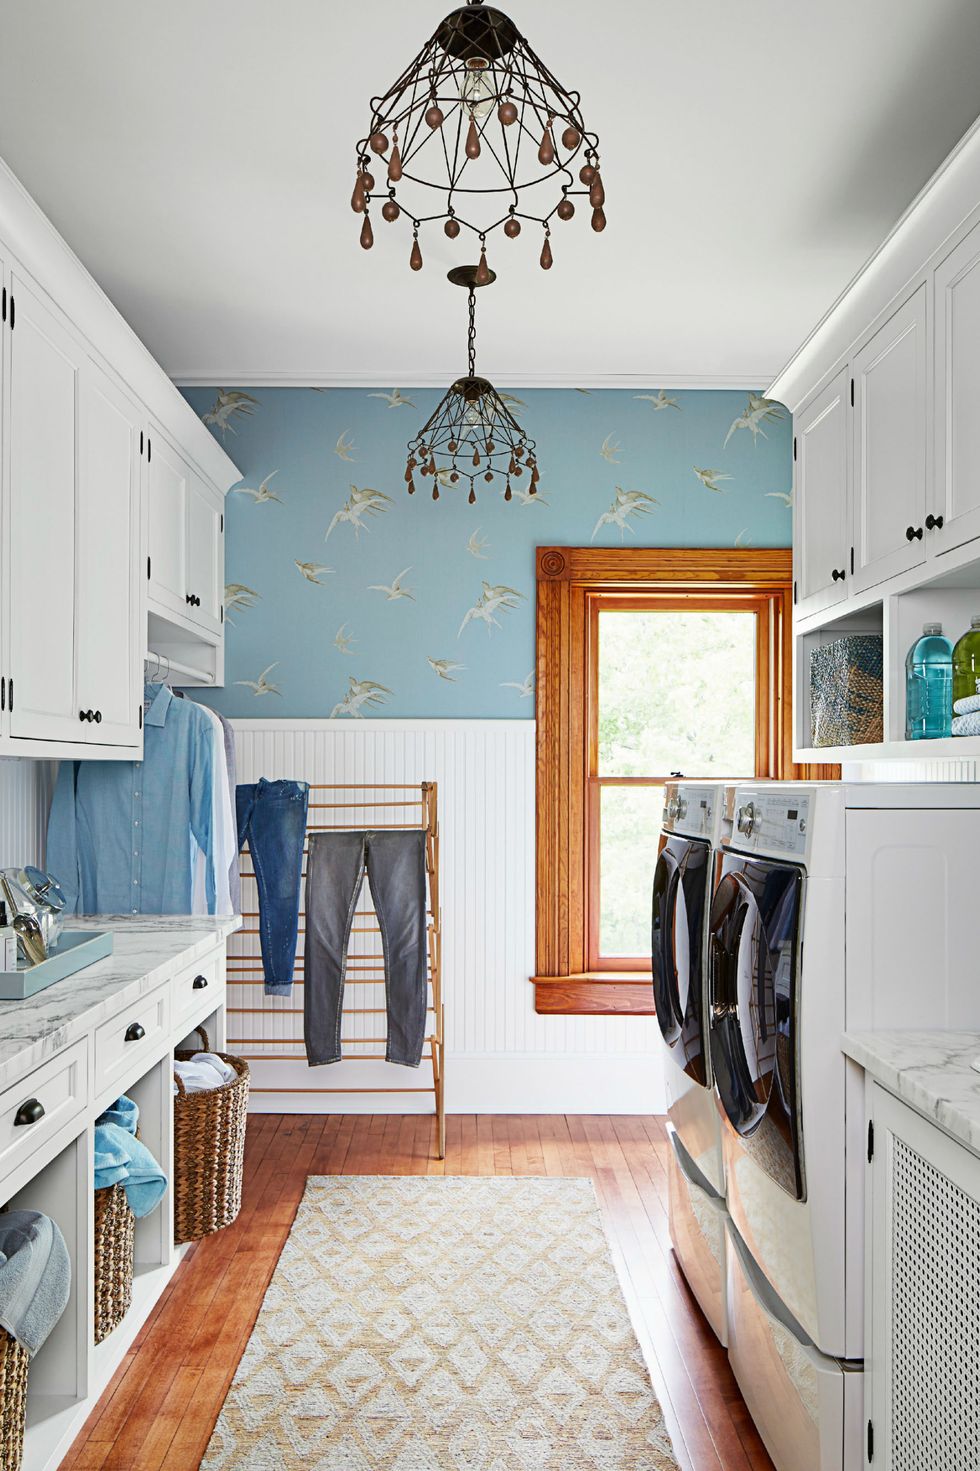 15 Shelf Over Washer and Dryer Ideas